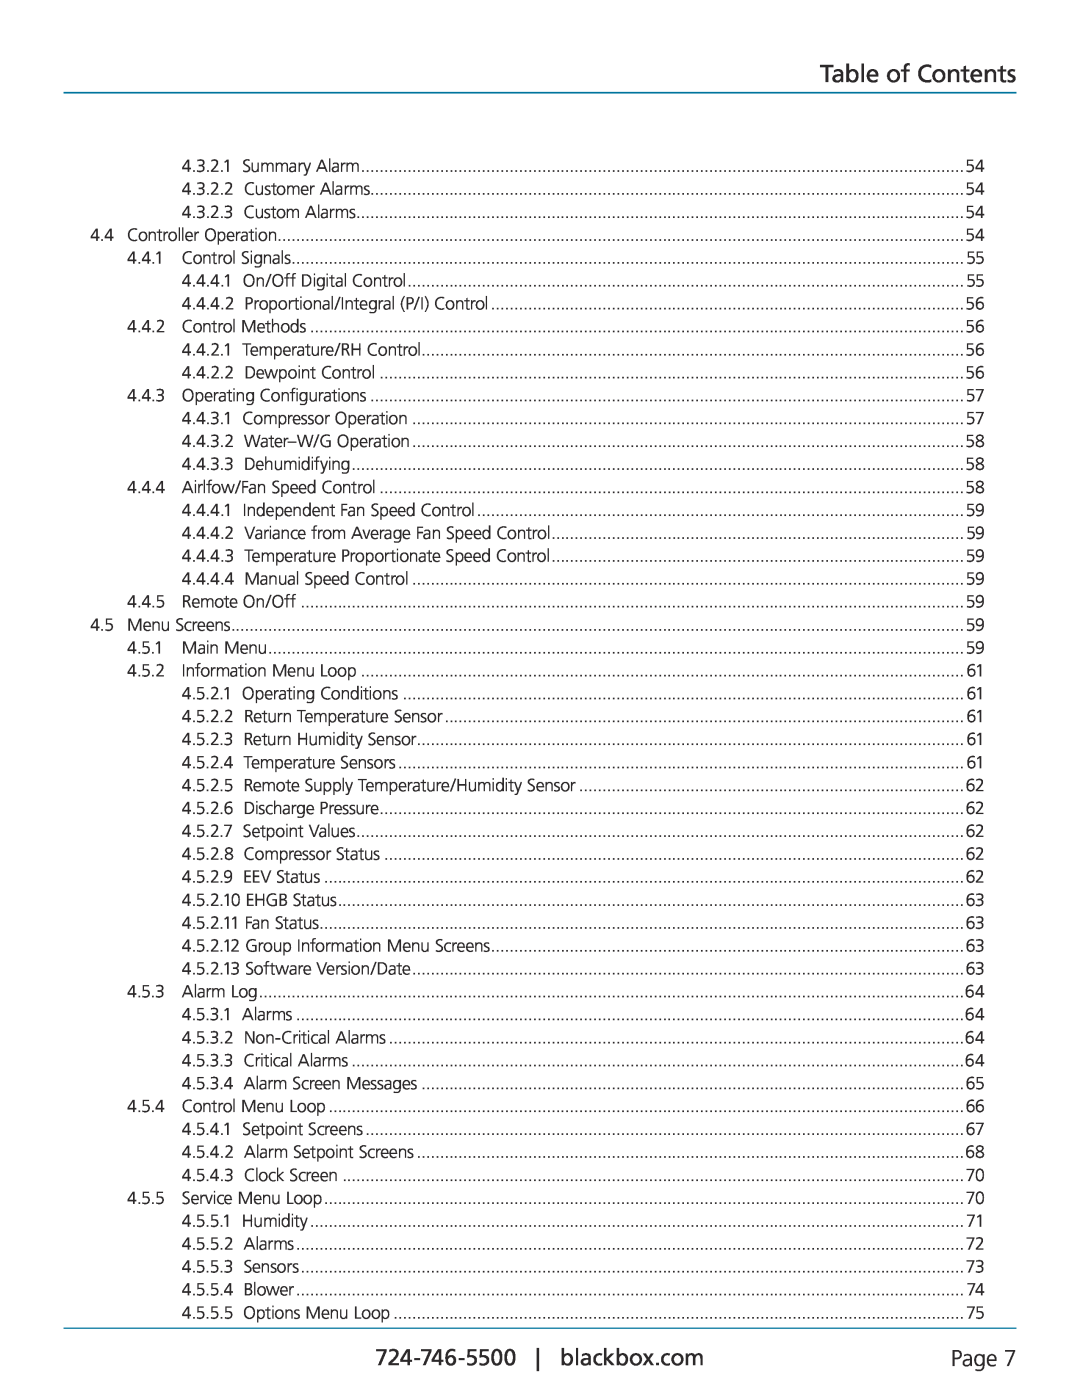 Black Box CRDX-W-FS-12KW, CRDX-A-FS-24KW, CRDX-G-FS-24KW, CRDX-W-FS-24KW, CRDX-G-FS-12KW user manual Table of Contents, Page 